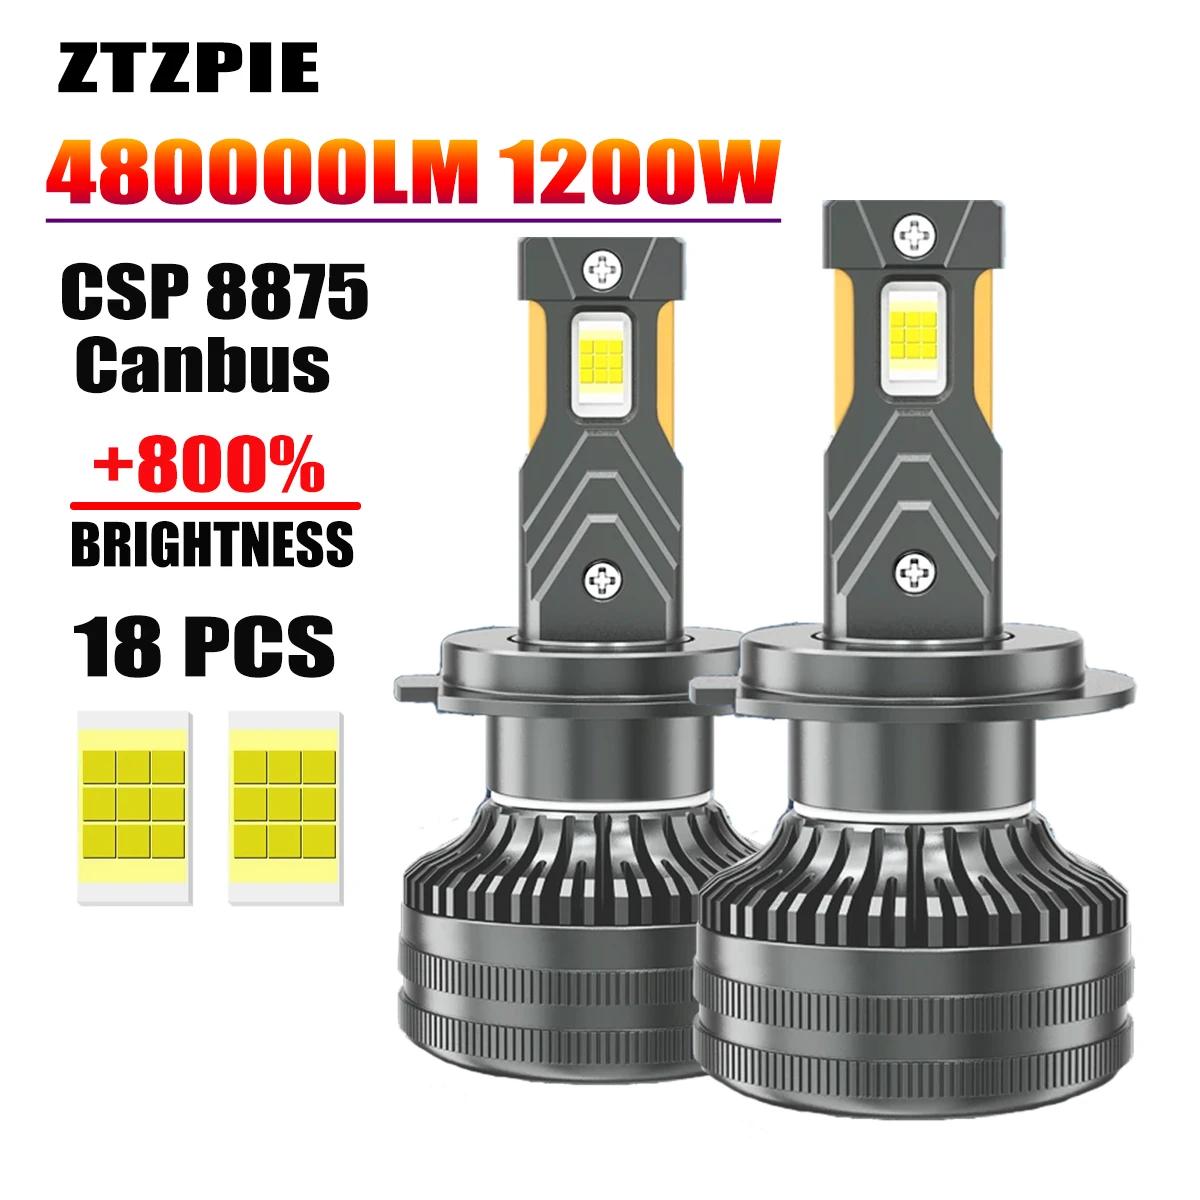 ZTZPIE ĵ LED  CSP 8775  ڵ Ʈ Ʈ, 6000K HB3 HB4 9005 9006 H1 H7 H4 H11 H8 9012 , 1200W 480000LM